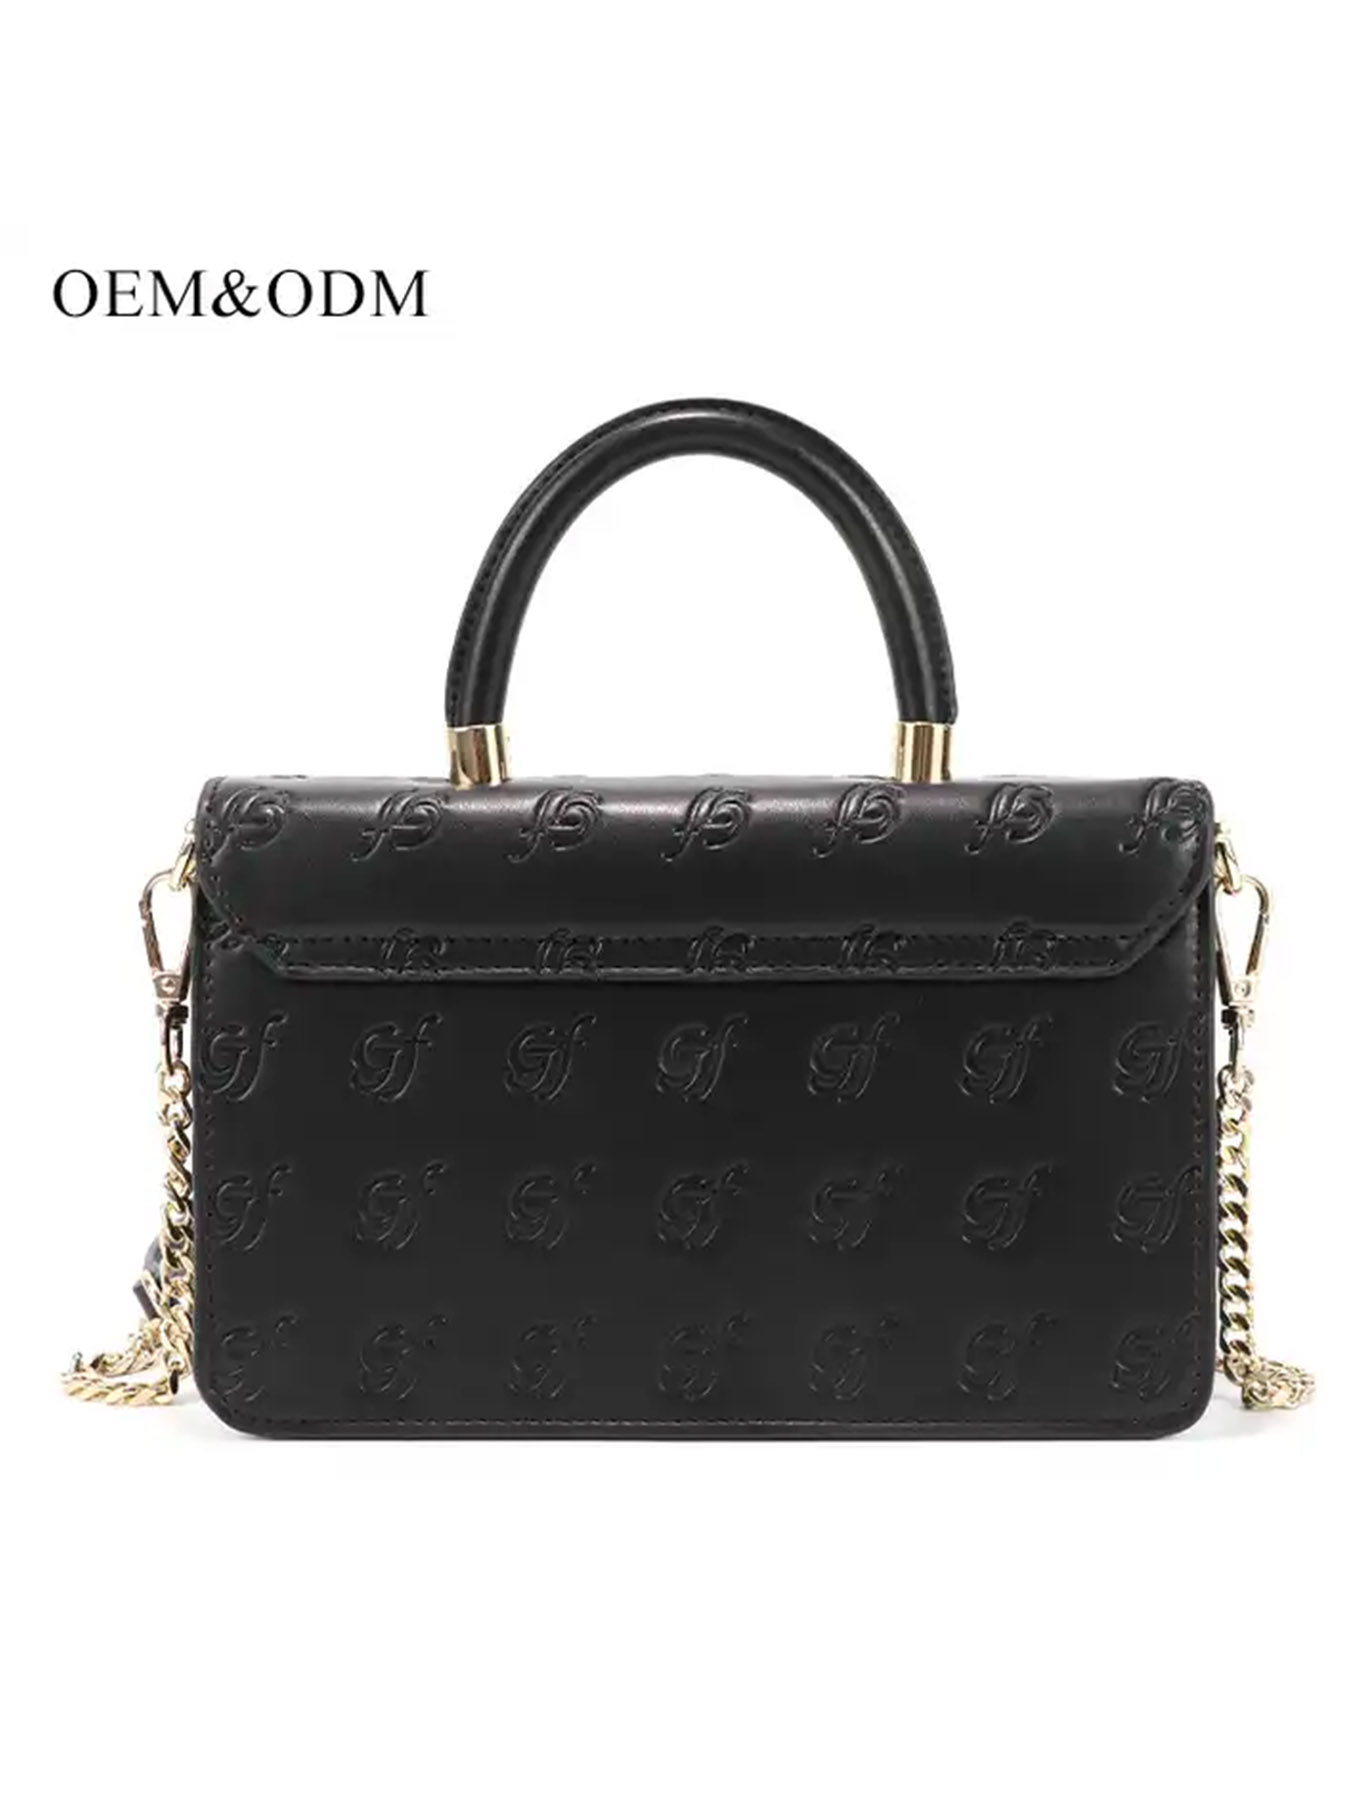 High quality and low-priced women's bags